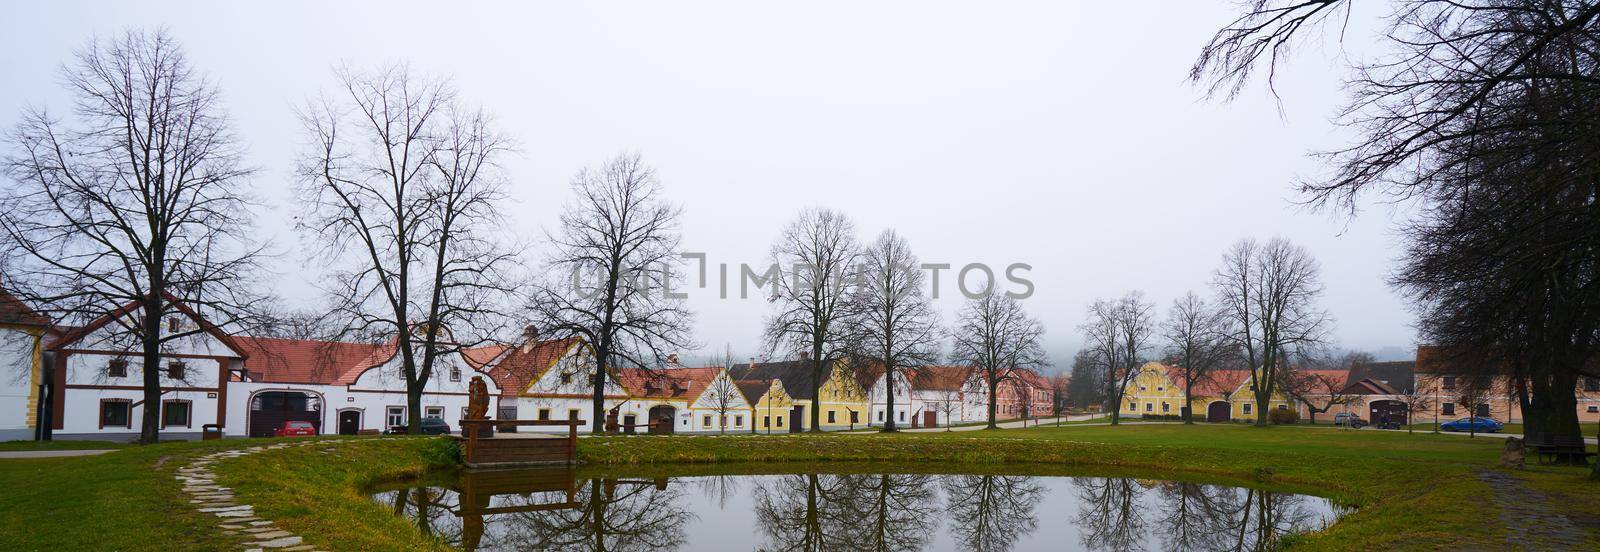 HOLASOVICE,CZECH REPUBLIC - November 24,2019 - View at the Houses in Holasovice. Holasovice is a small historic village located in the south of the Czech Republic